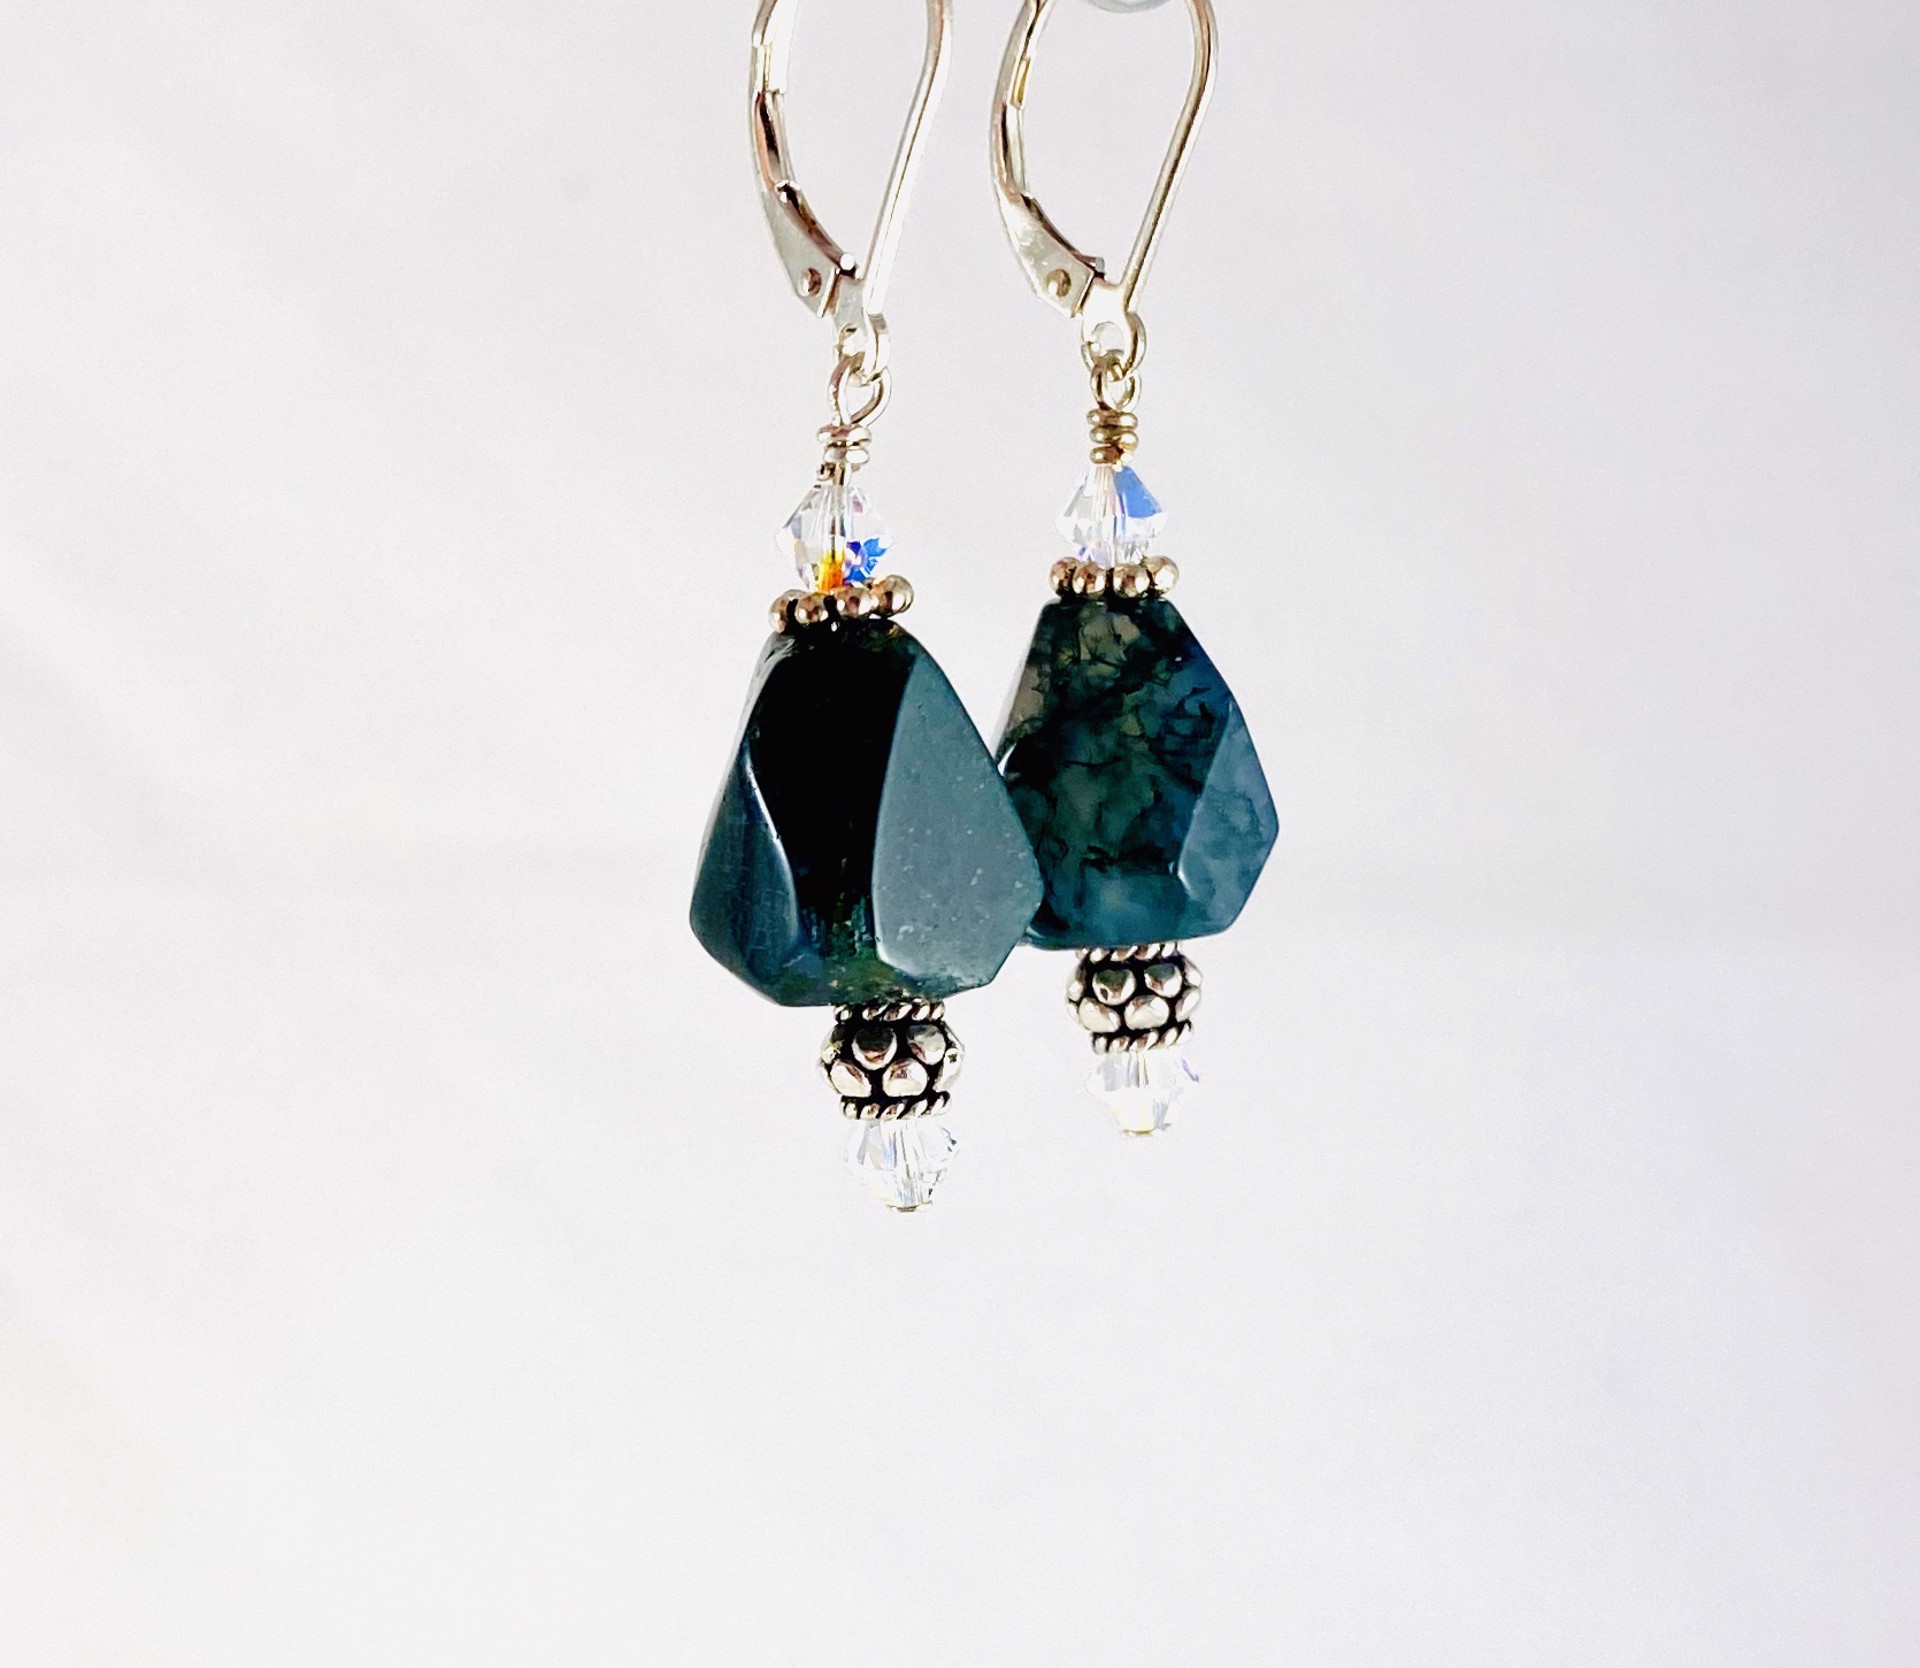 SHOSH19-12 Faceted Variegated Stone Crystal Earrings by Shoshannah Weinisch